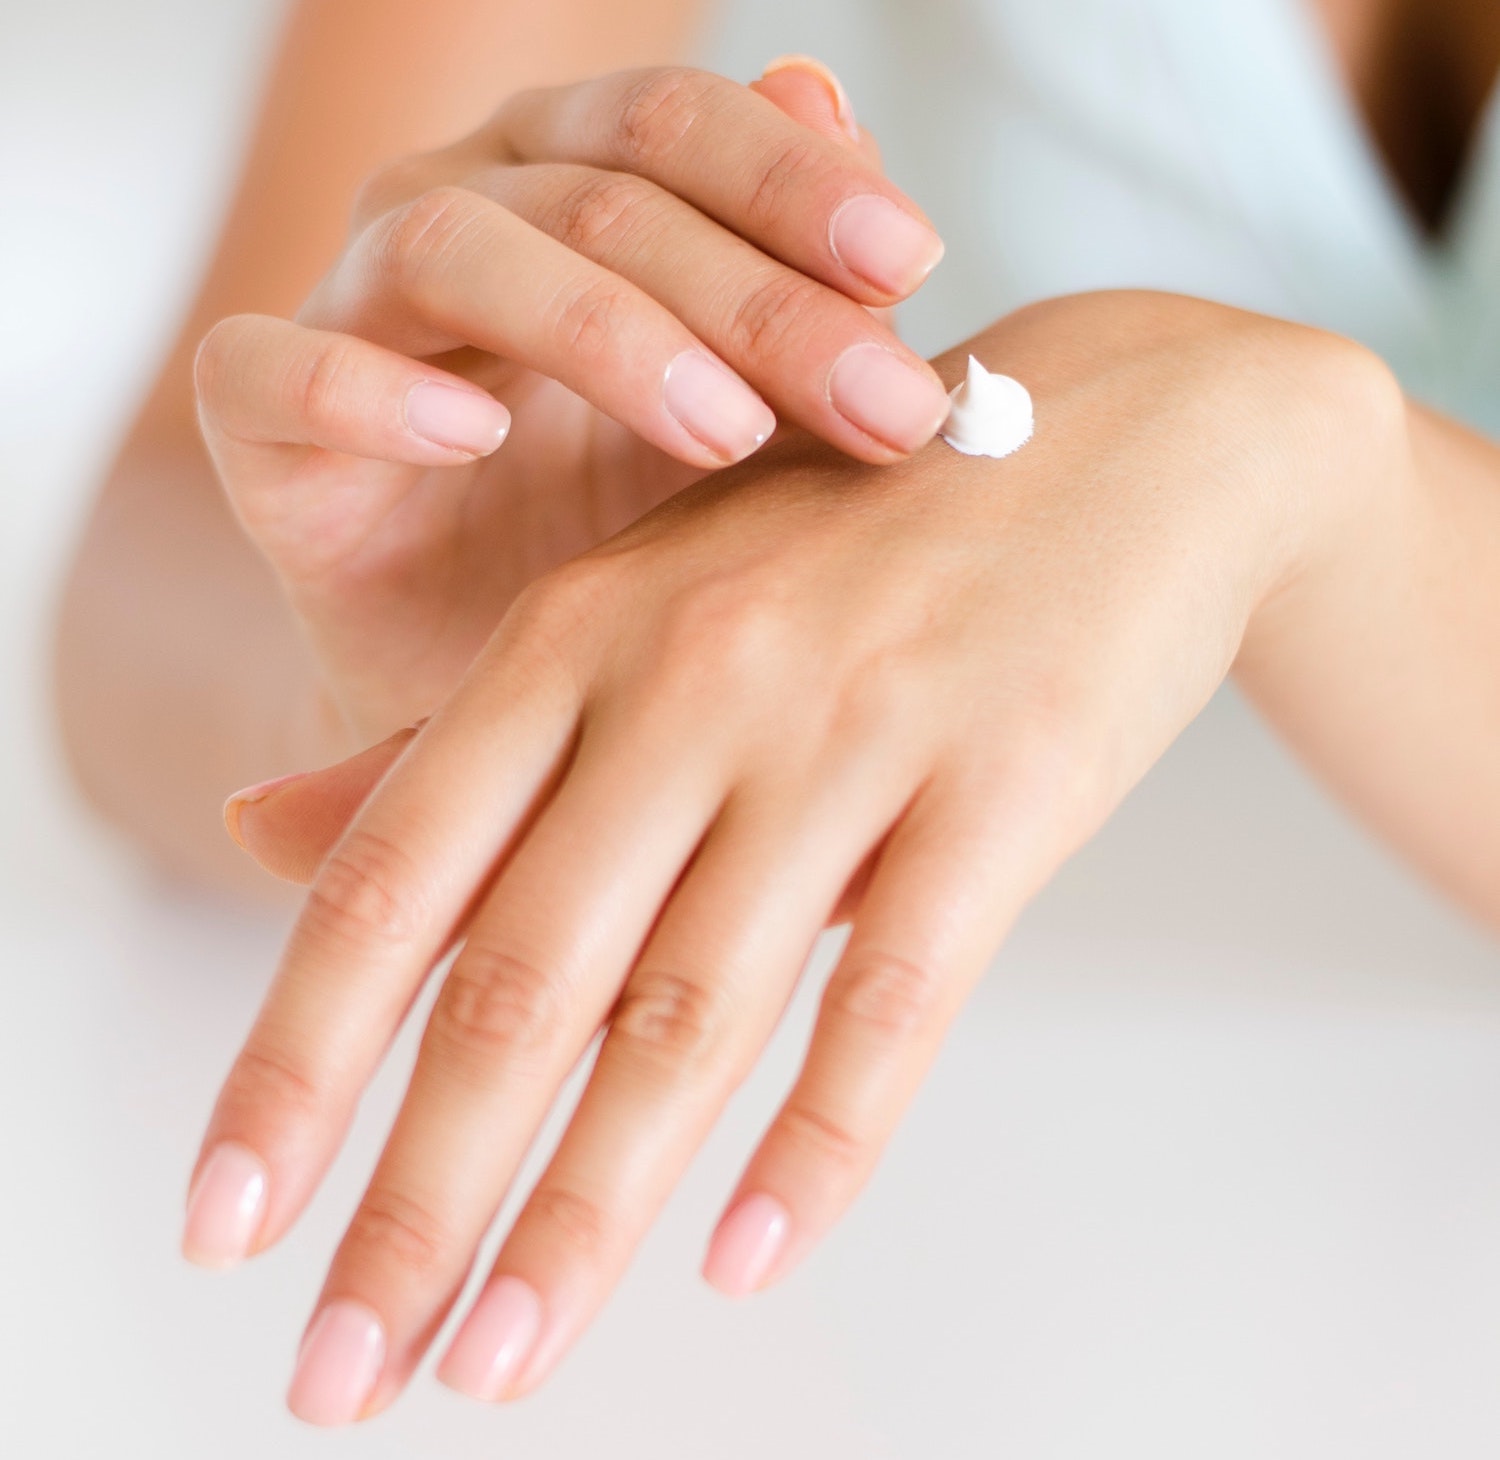 Our Beauty Editors Spill Their All-Time Favorite Hand Creams